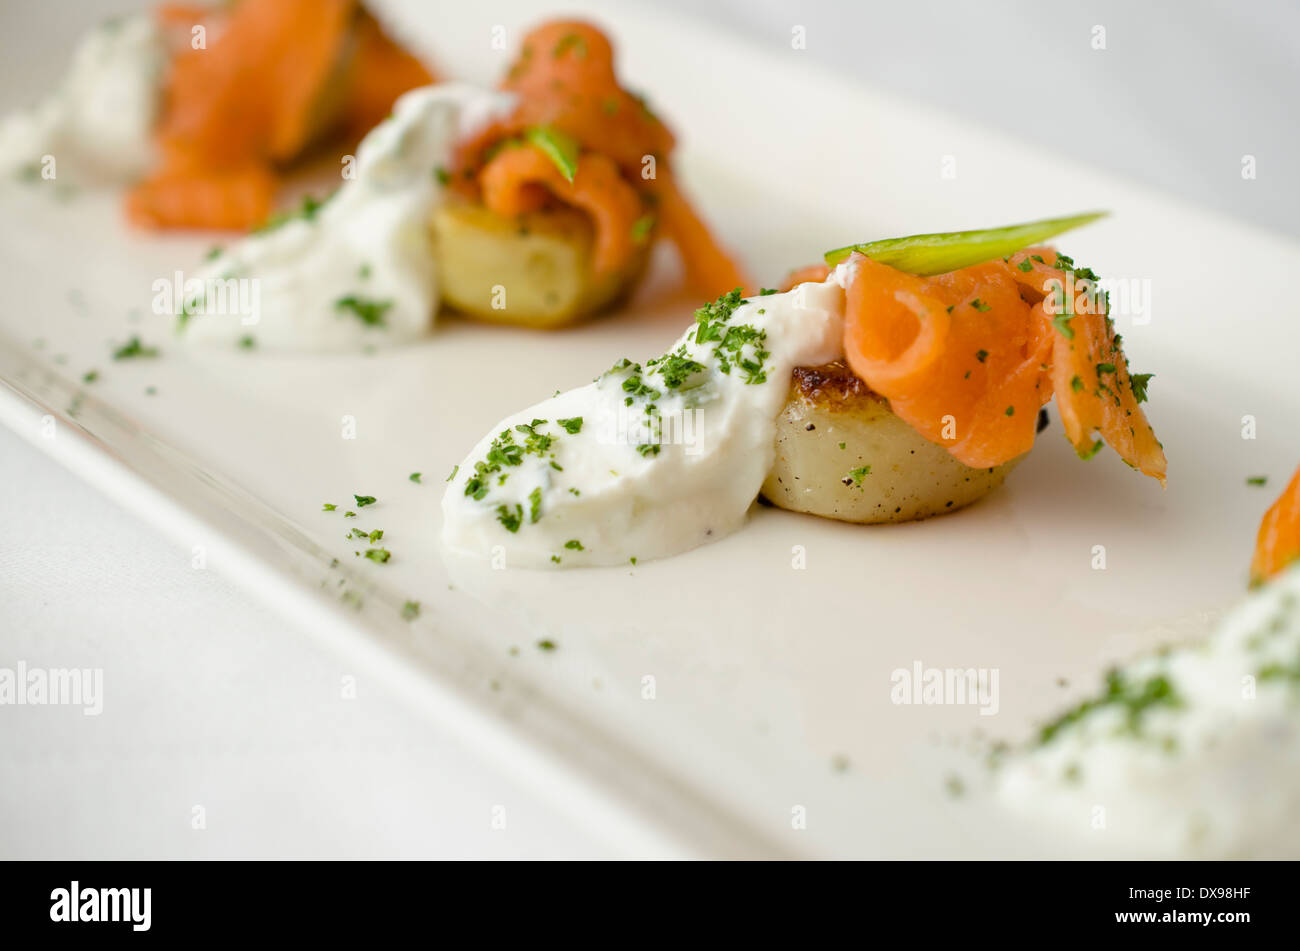 Smoked Salmon on Fried Potatoes with Herb Yogurt and Finely Chopped Parsley. Stock Photo